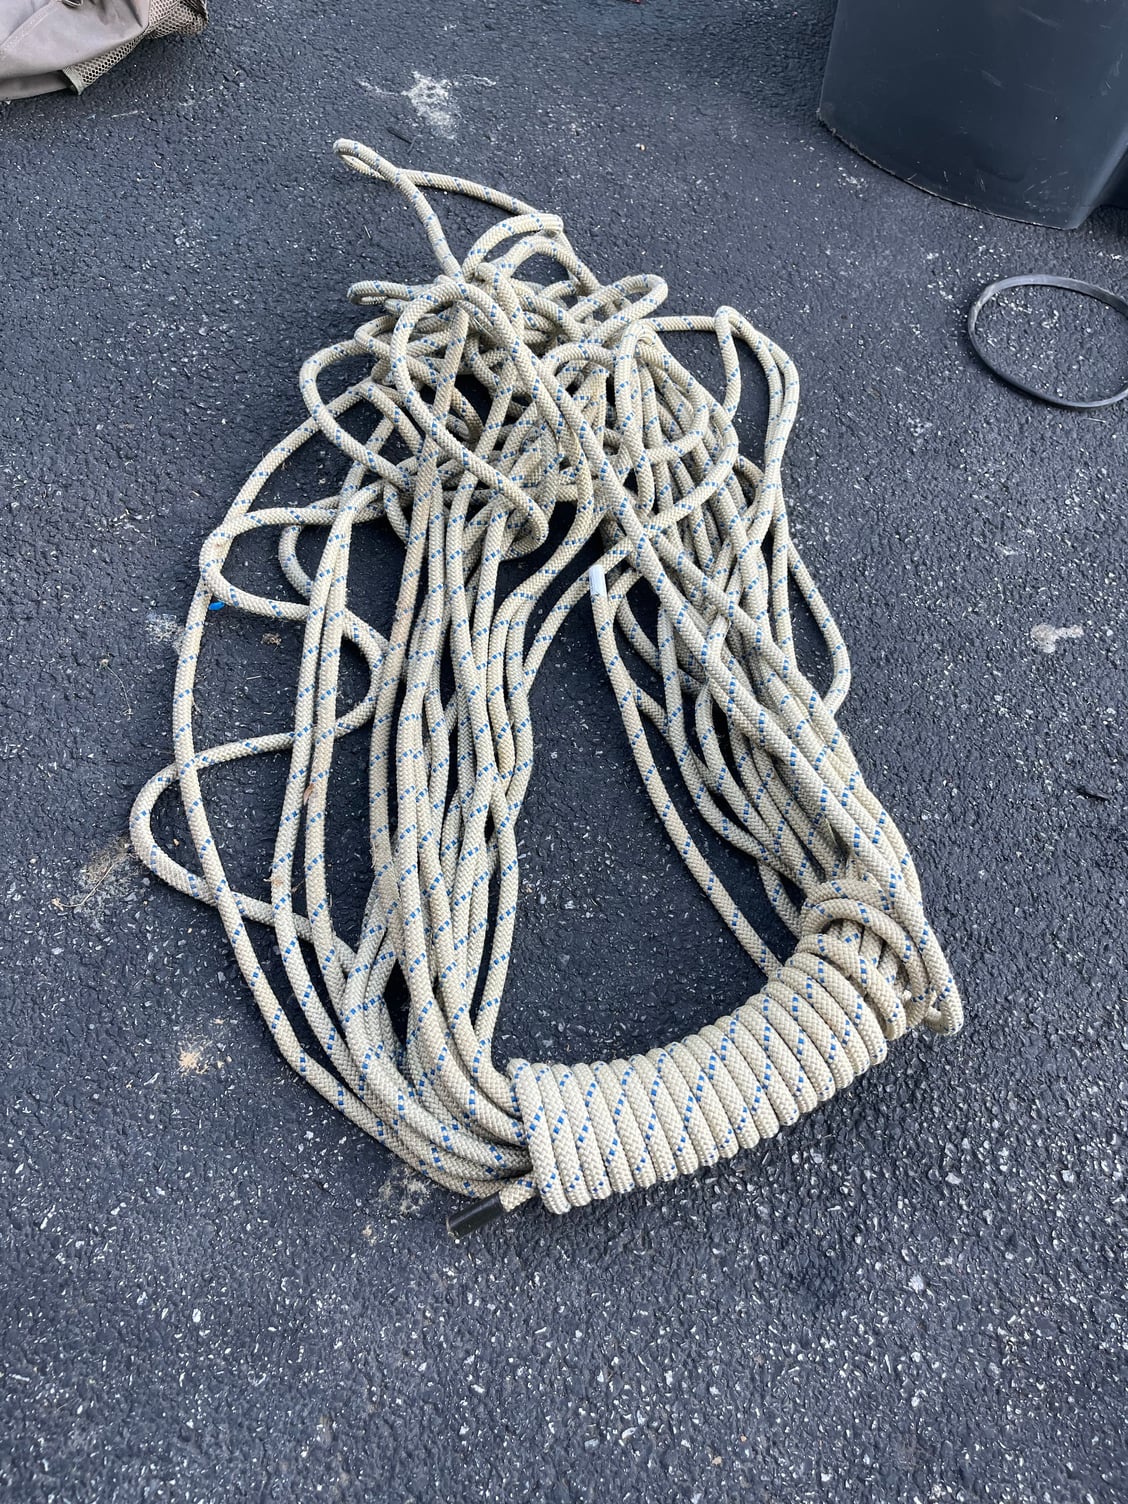 Using climbing rope for dock lines - The Hull Truth - Boating and Fishing  Forum